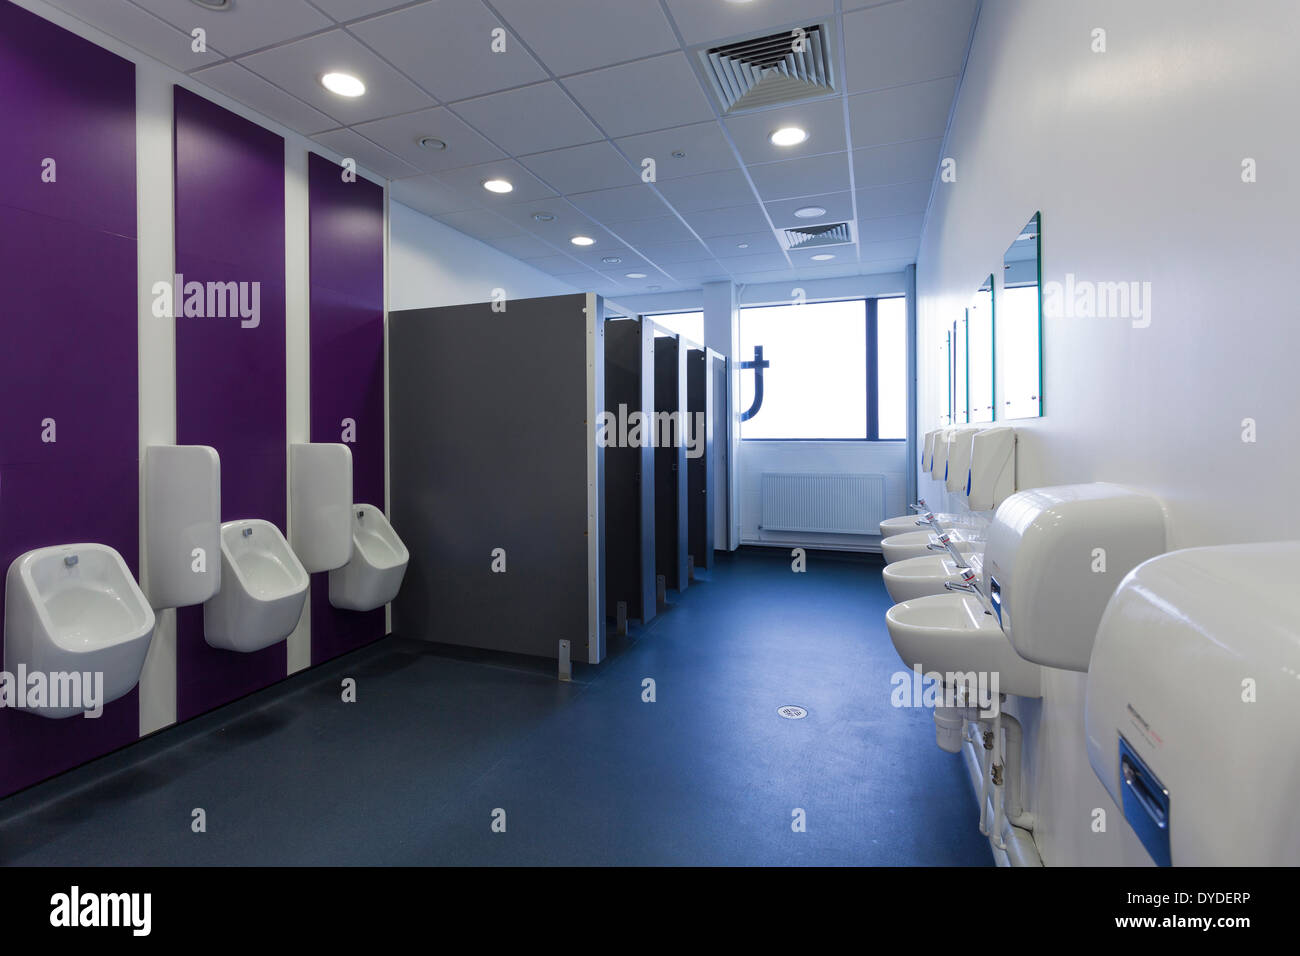 Unoccupied male public toilets in commercial building. Stock Photo